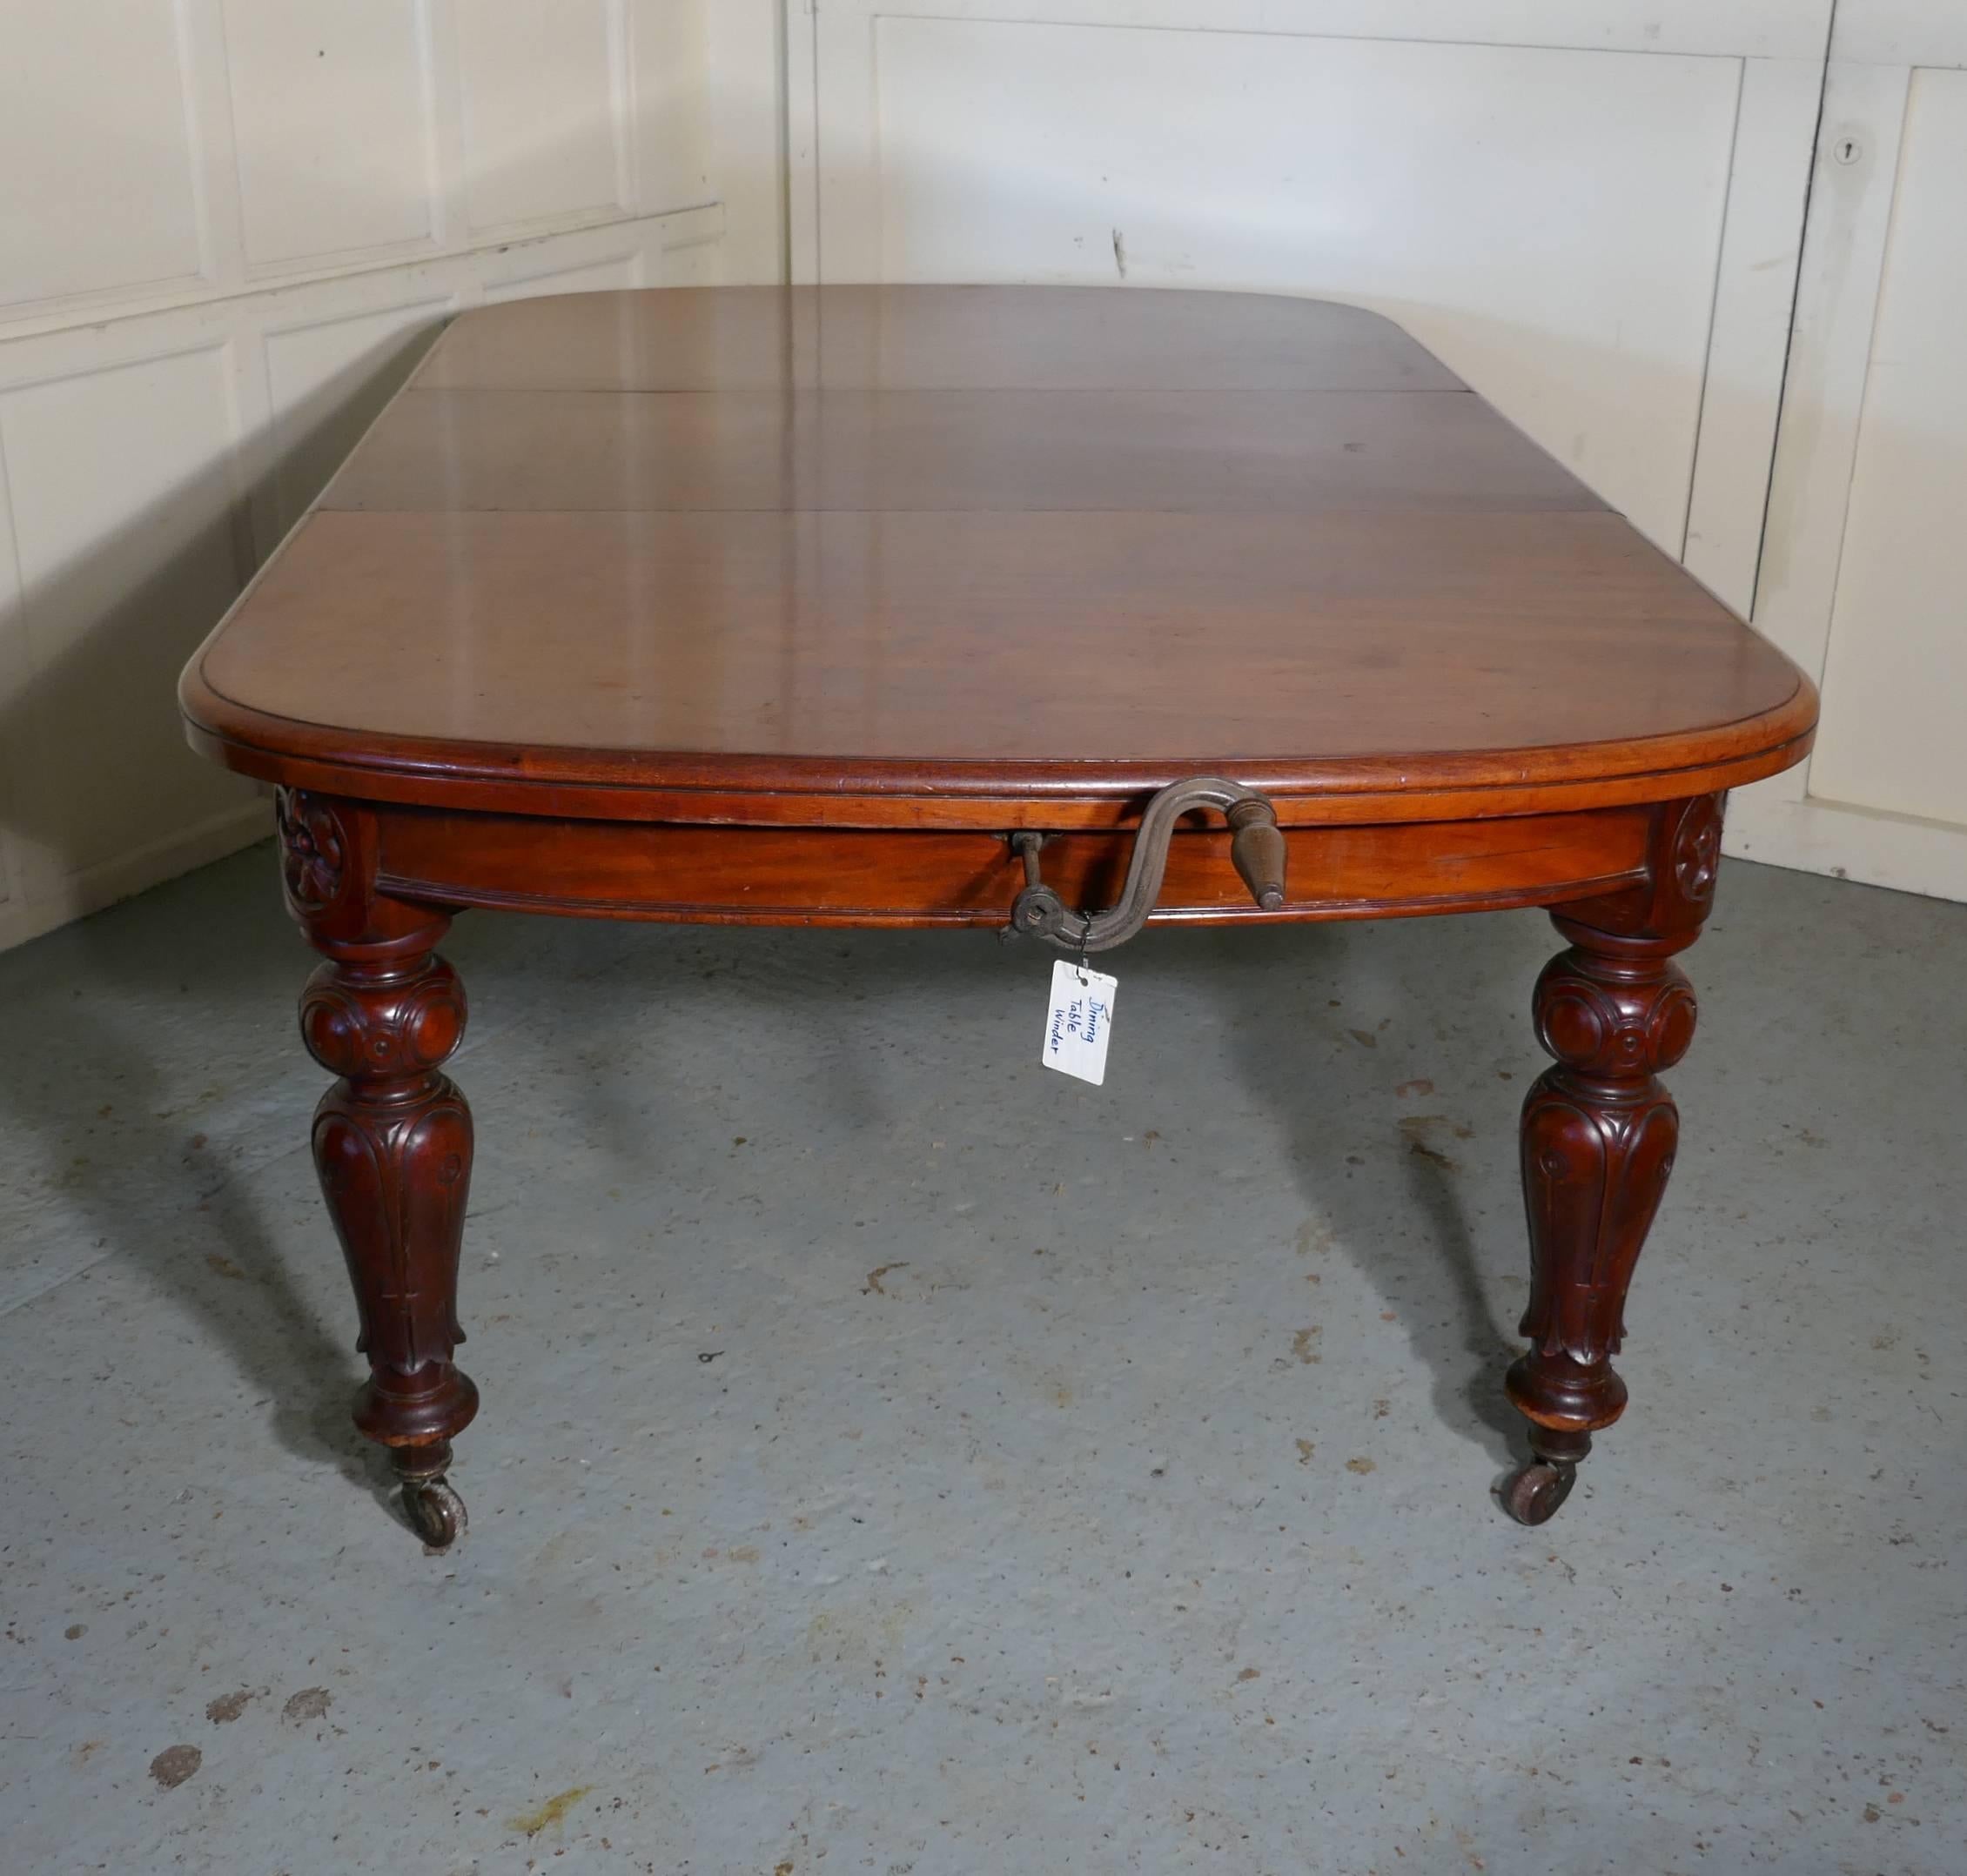 Early Victorian Mahogany Extending Dining Table, Seats 12 Diners 2